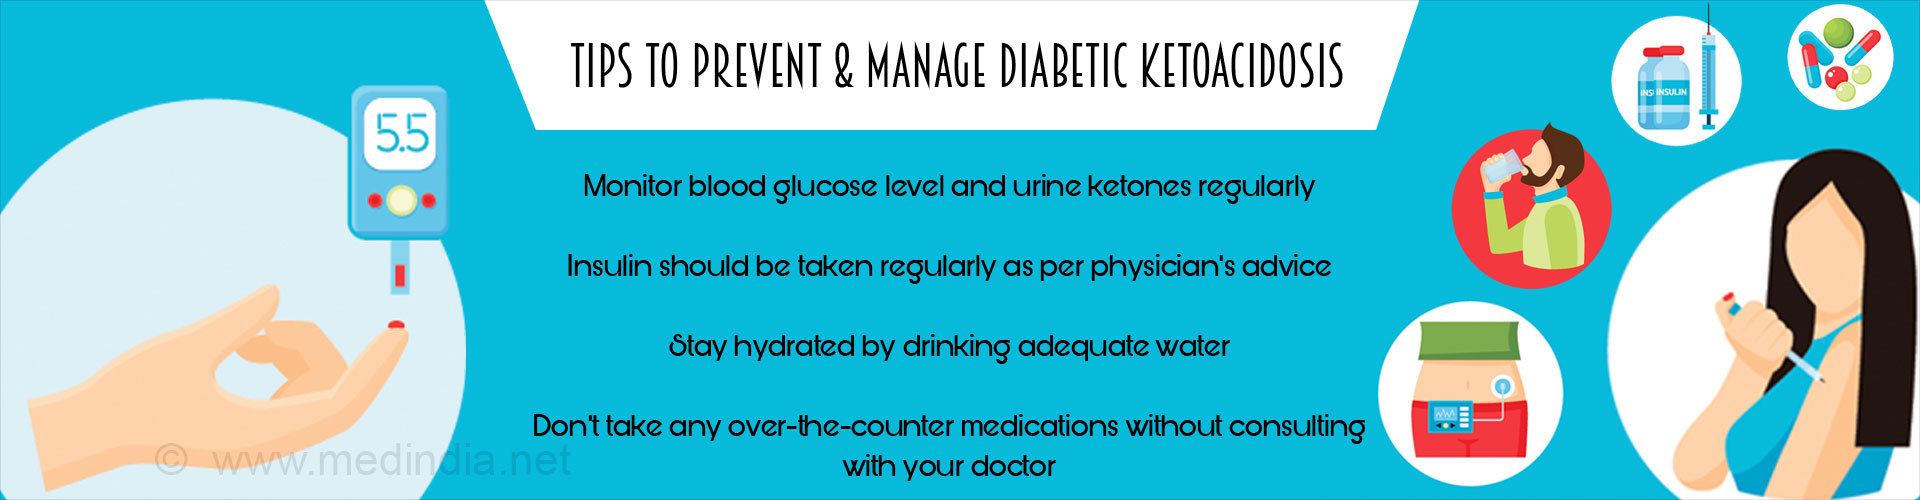 Tips to Prevent and Manage Diabetic Ketoacidosis